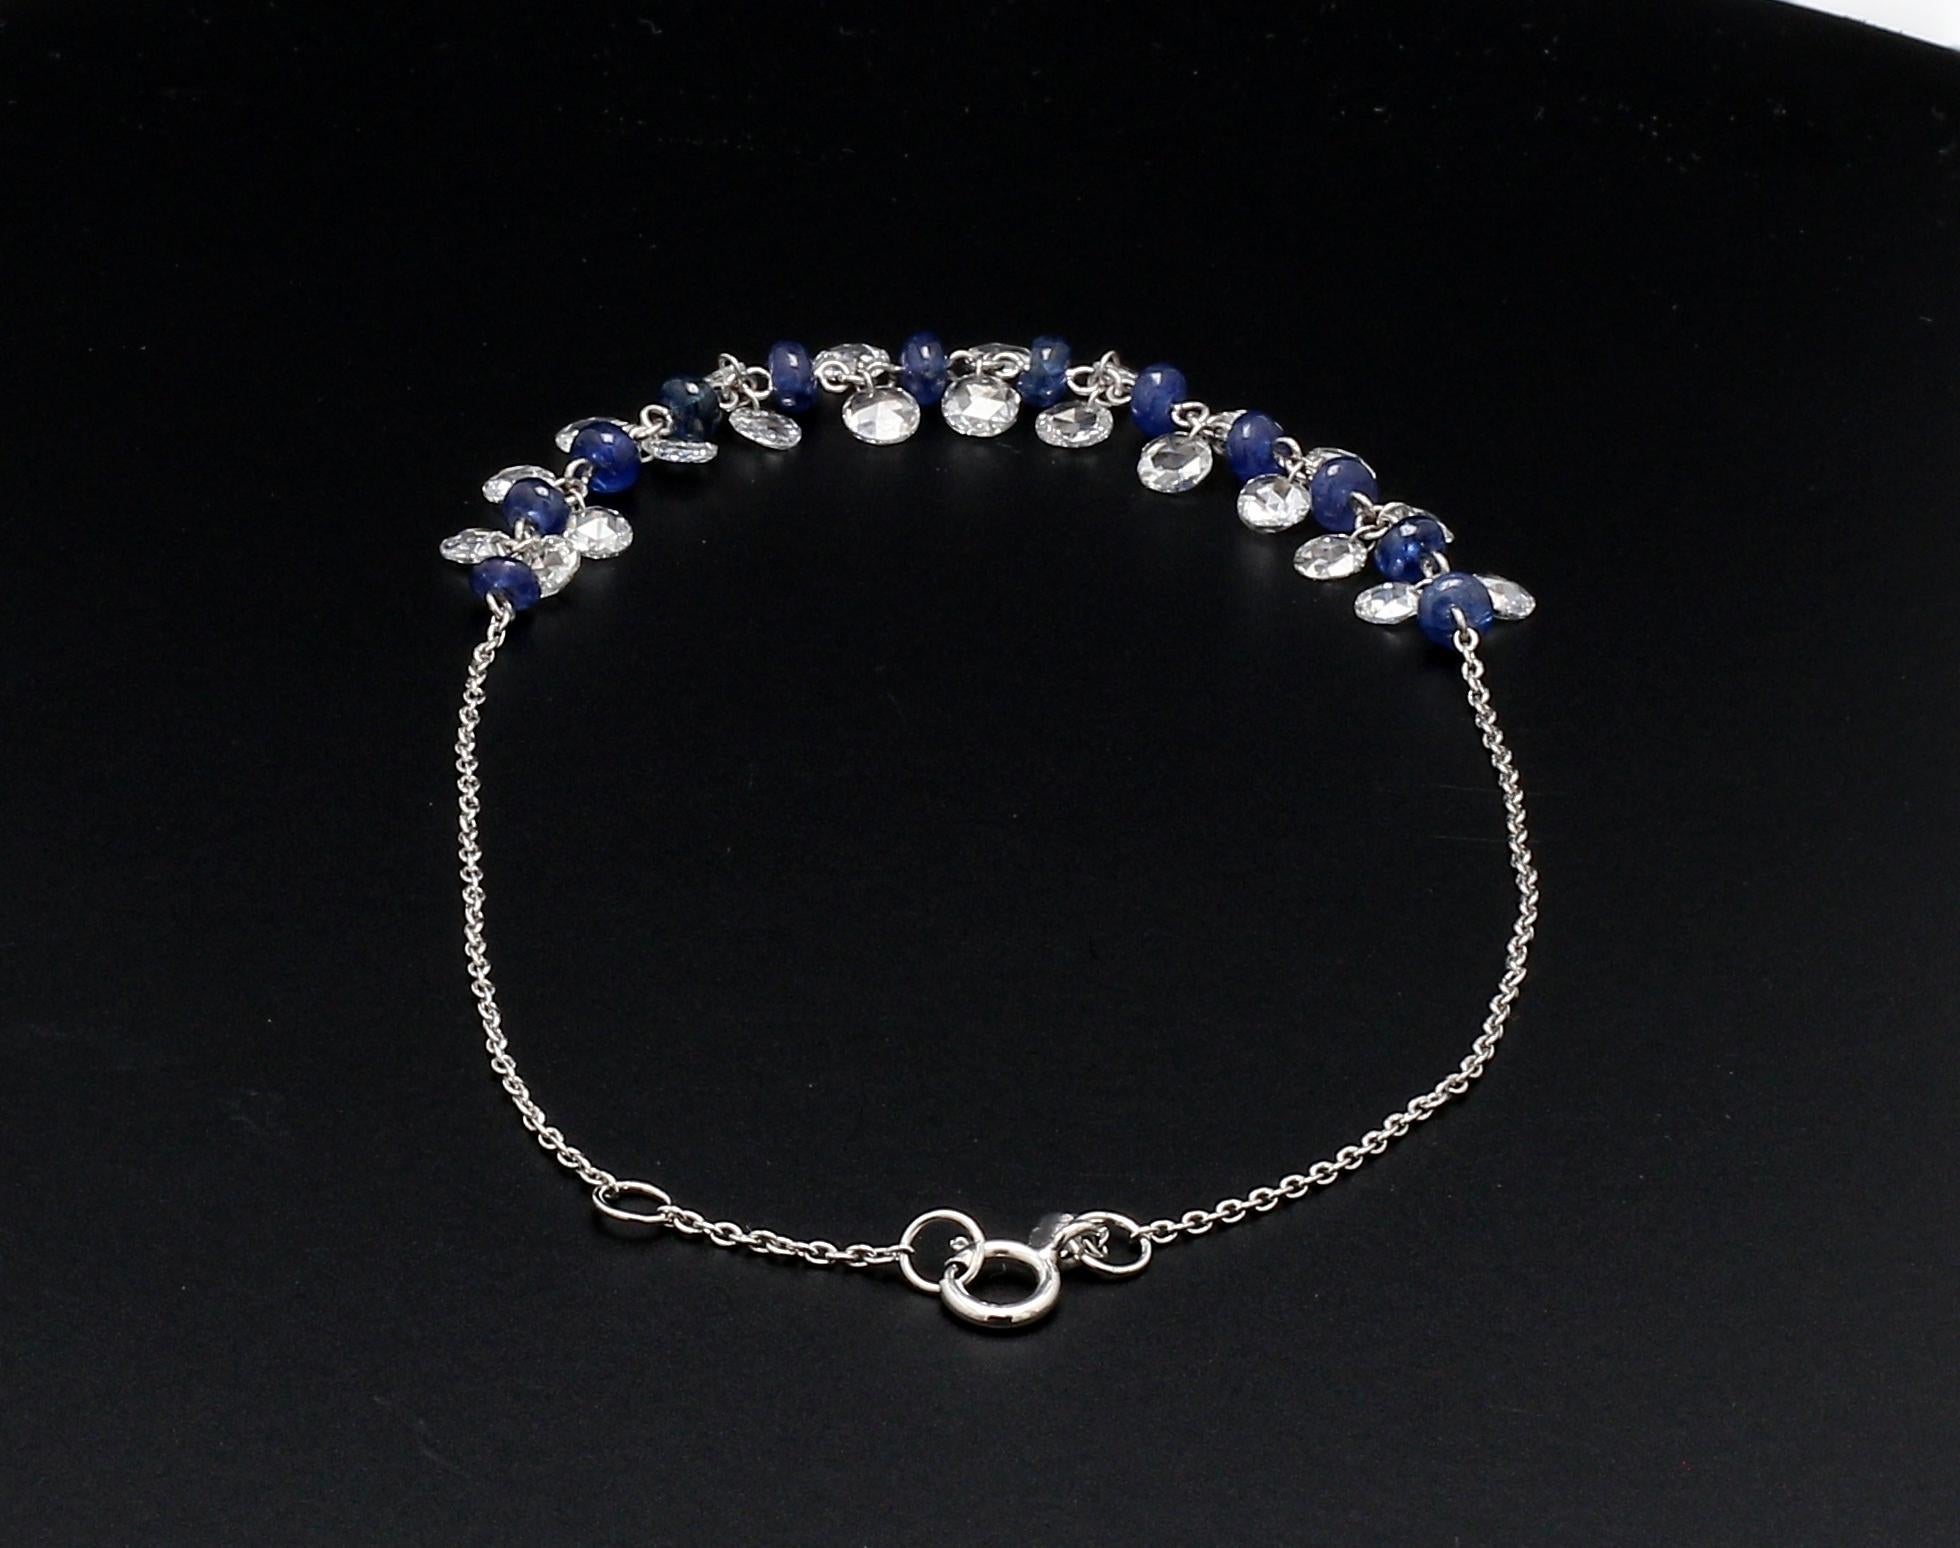 PANIM Rose Cut Diamond and Sapphire Dangling Bracelet in 18 Karat White Gold In New Condition For Sale In Tsim Sha Tsui, Hong Kong